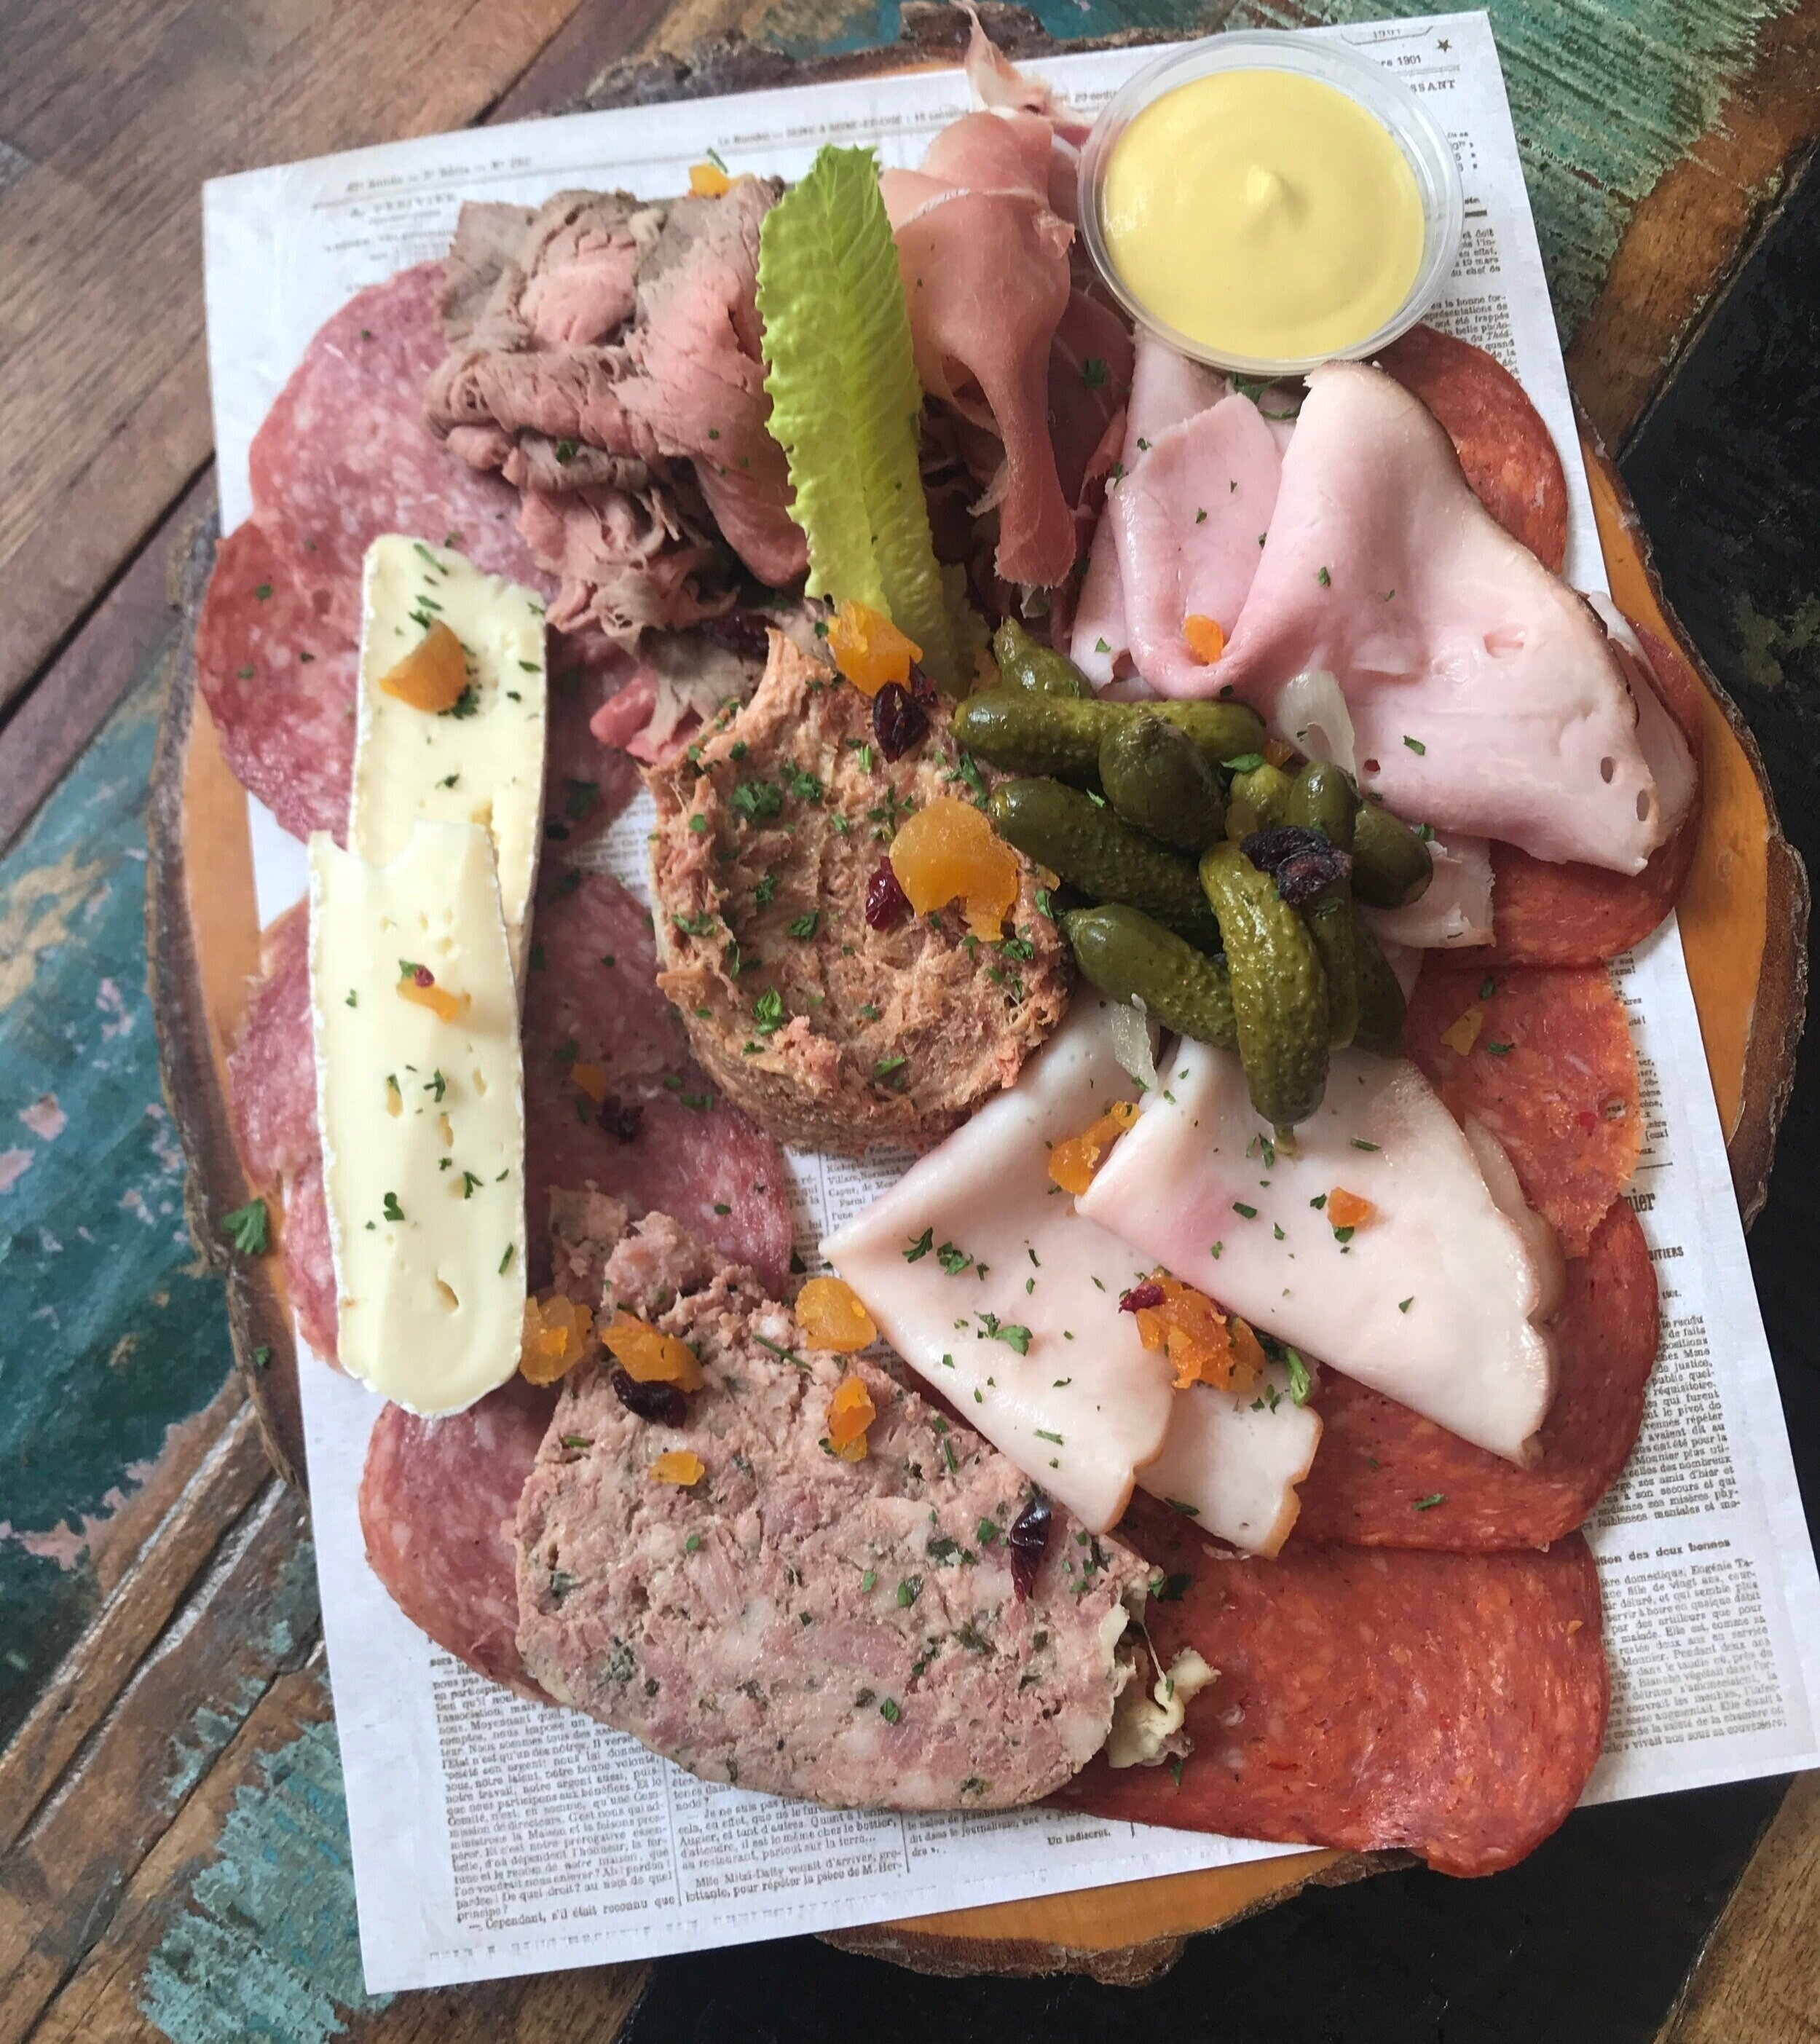 No Charcuterie quite like this